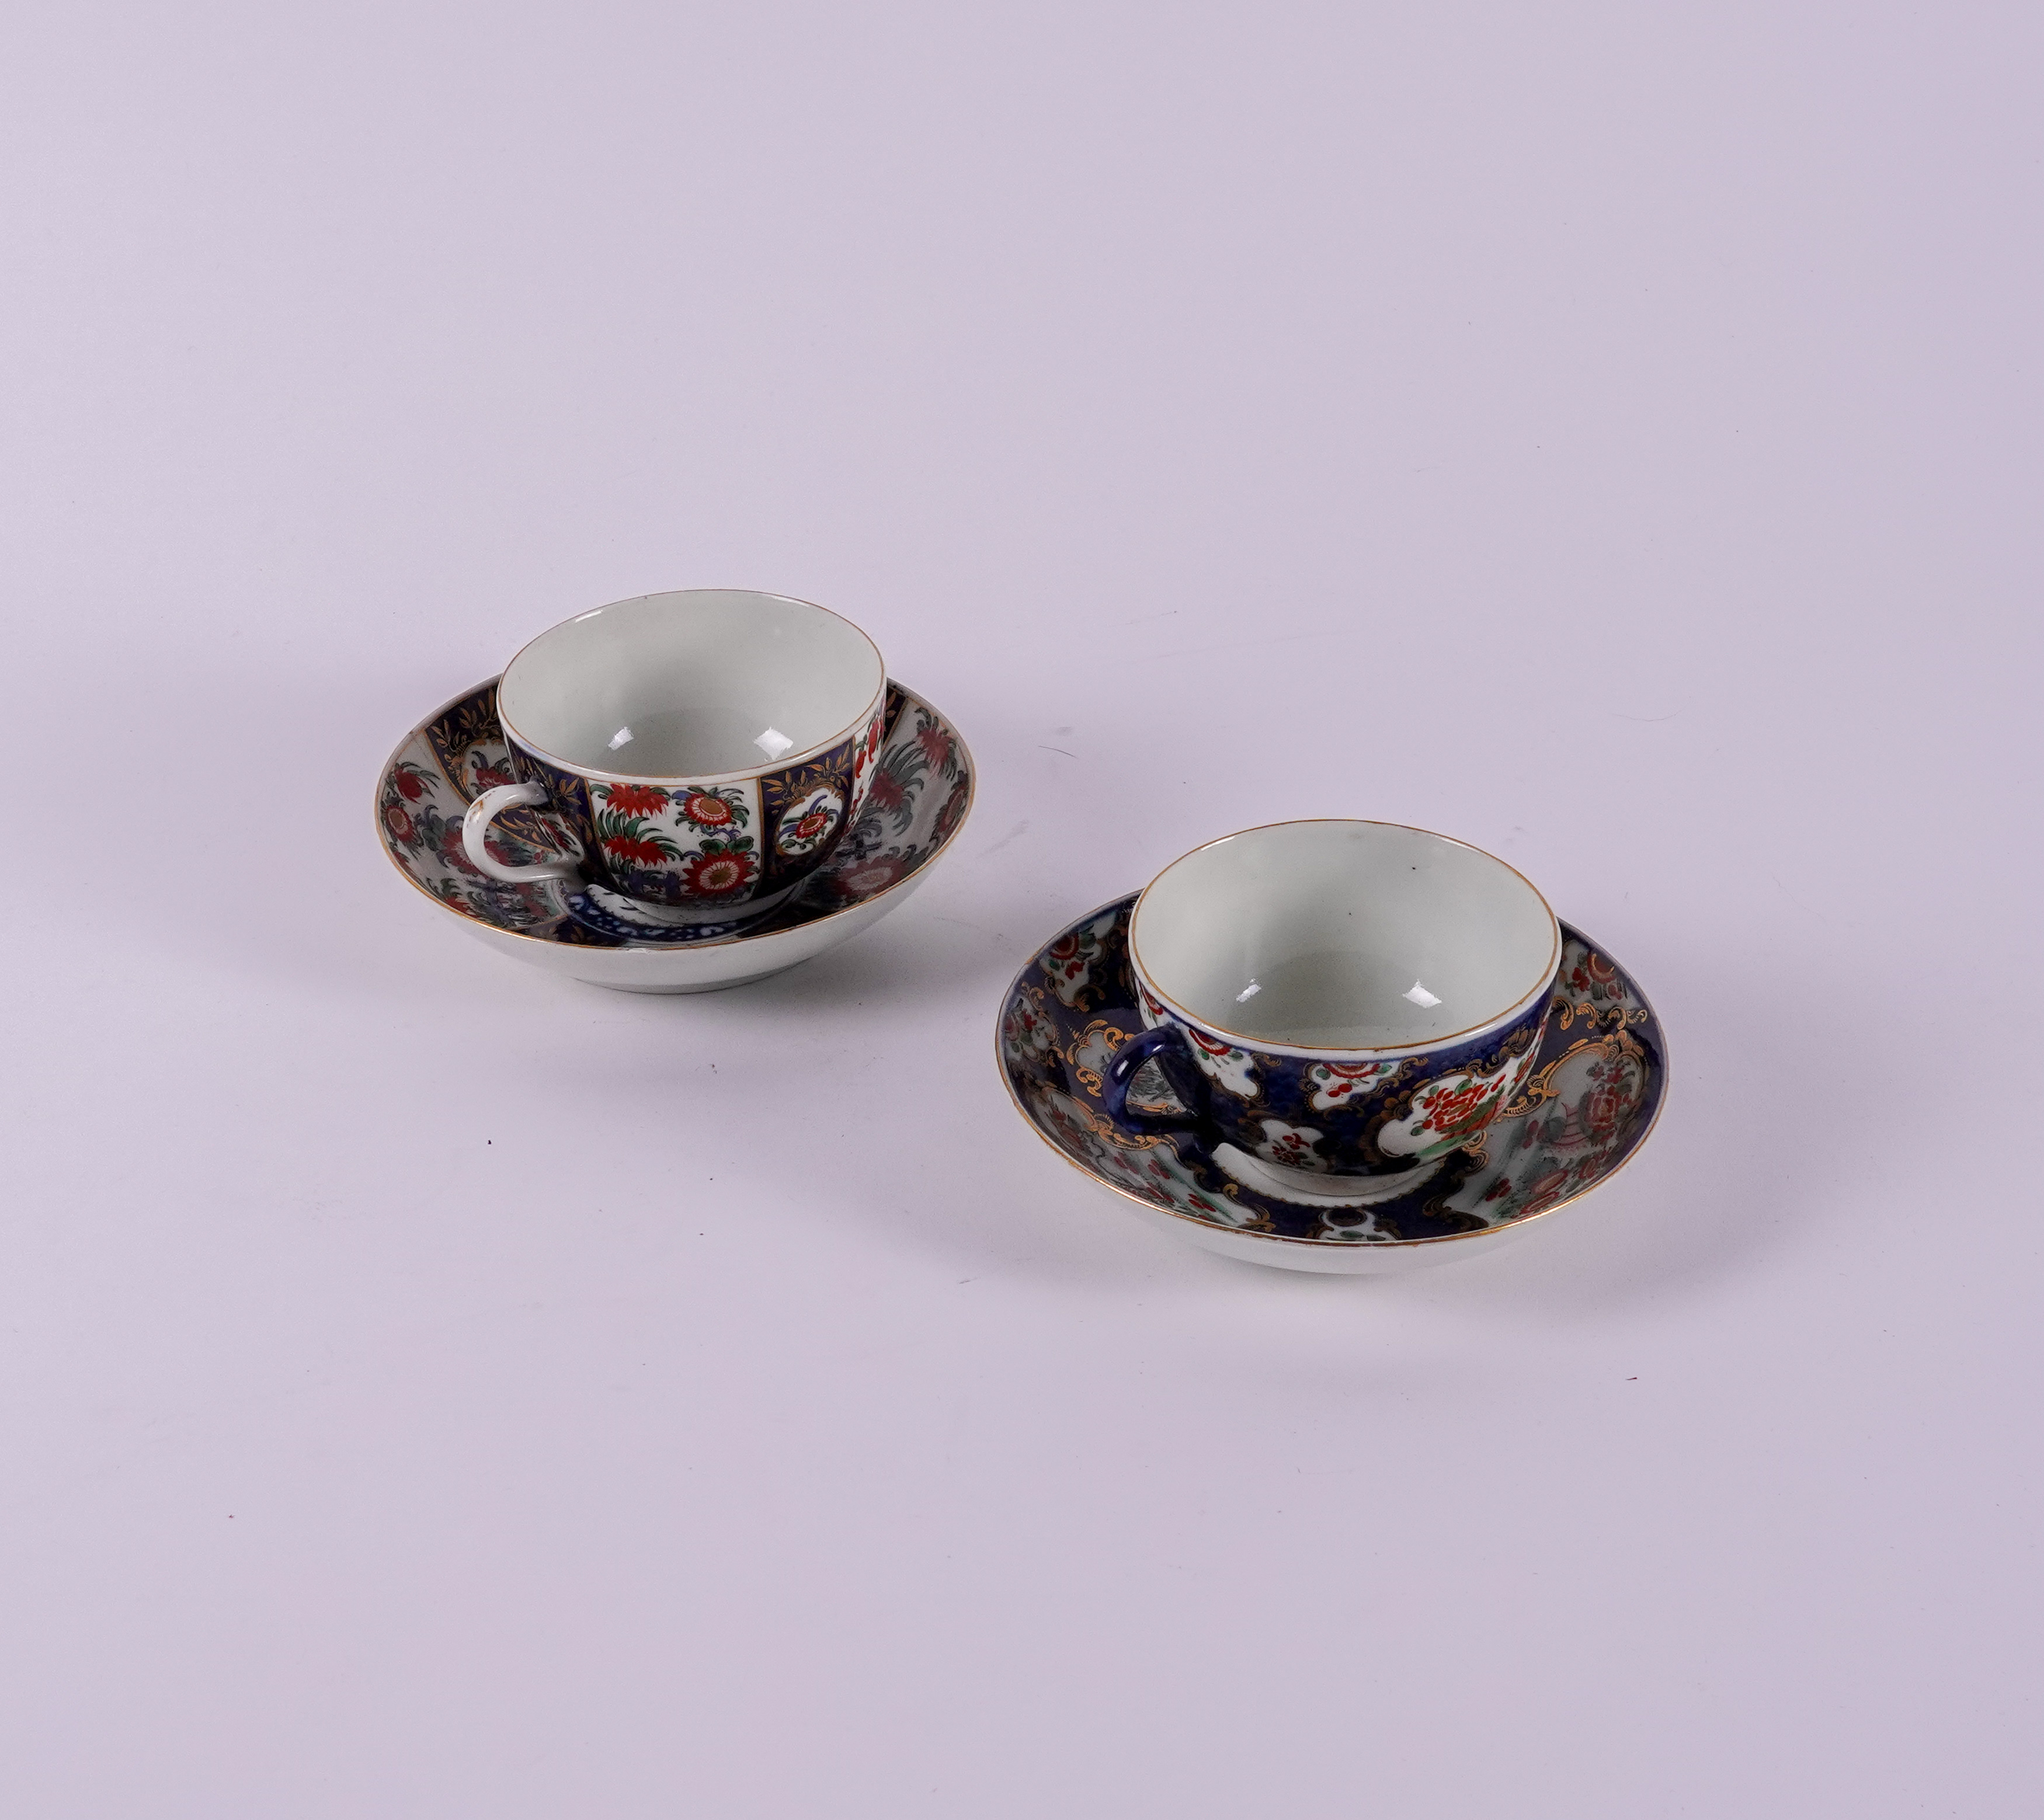 A WORCESTER BLUE-GROUND TEACUP AND SAUCER (4) - Image 3 of 6